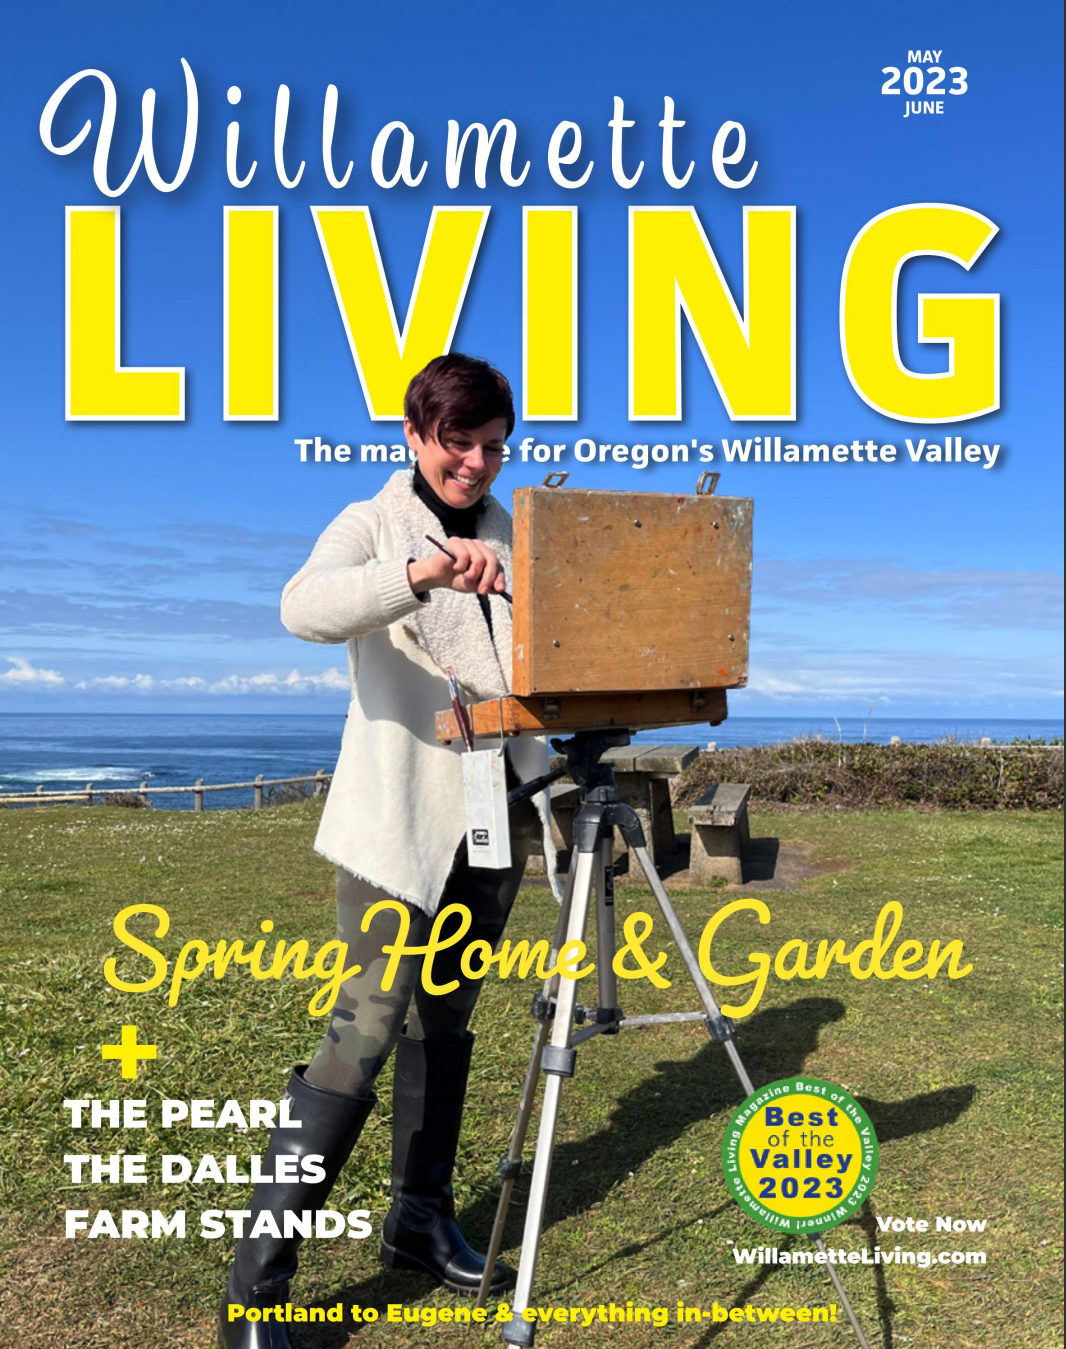 The Dalles Featured in Willamette Living